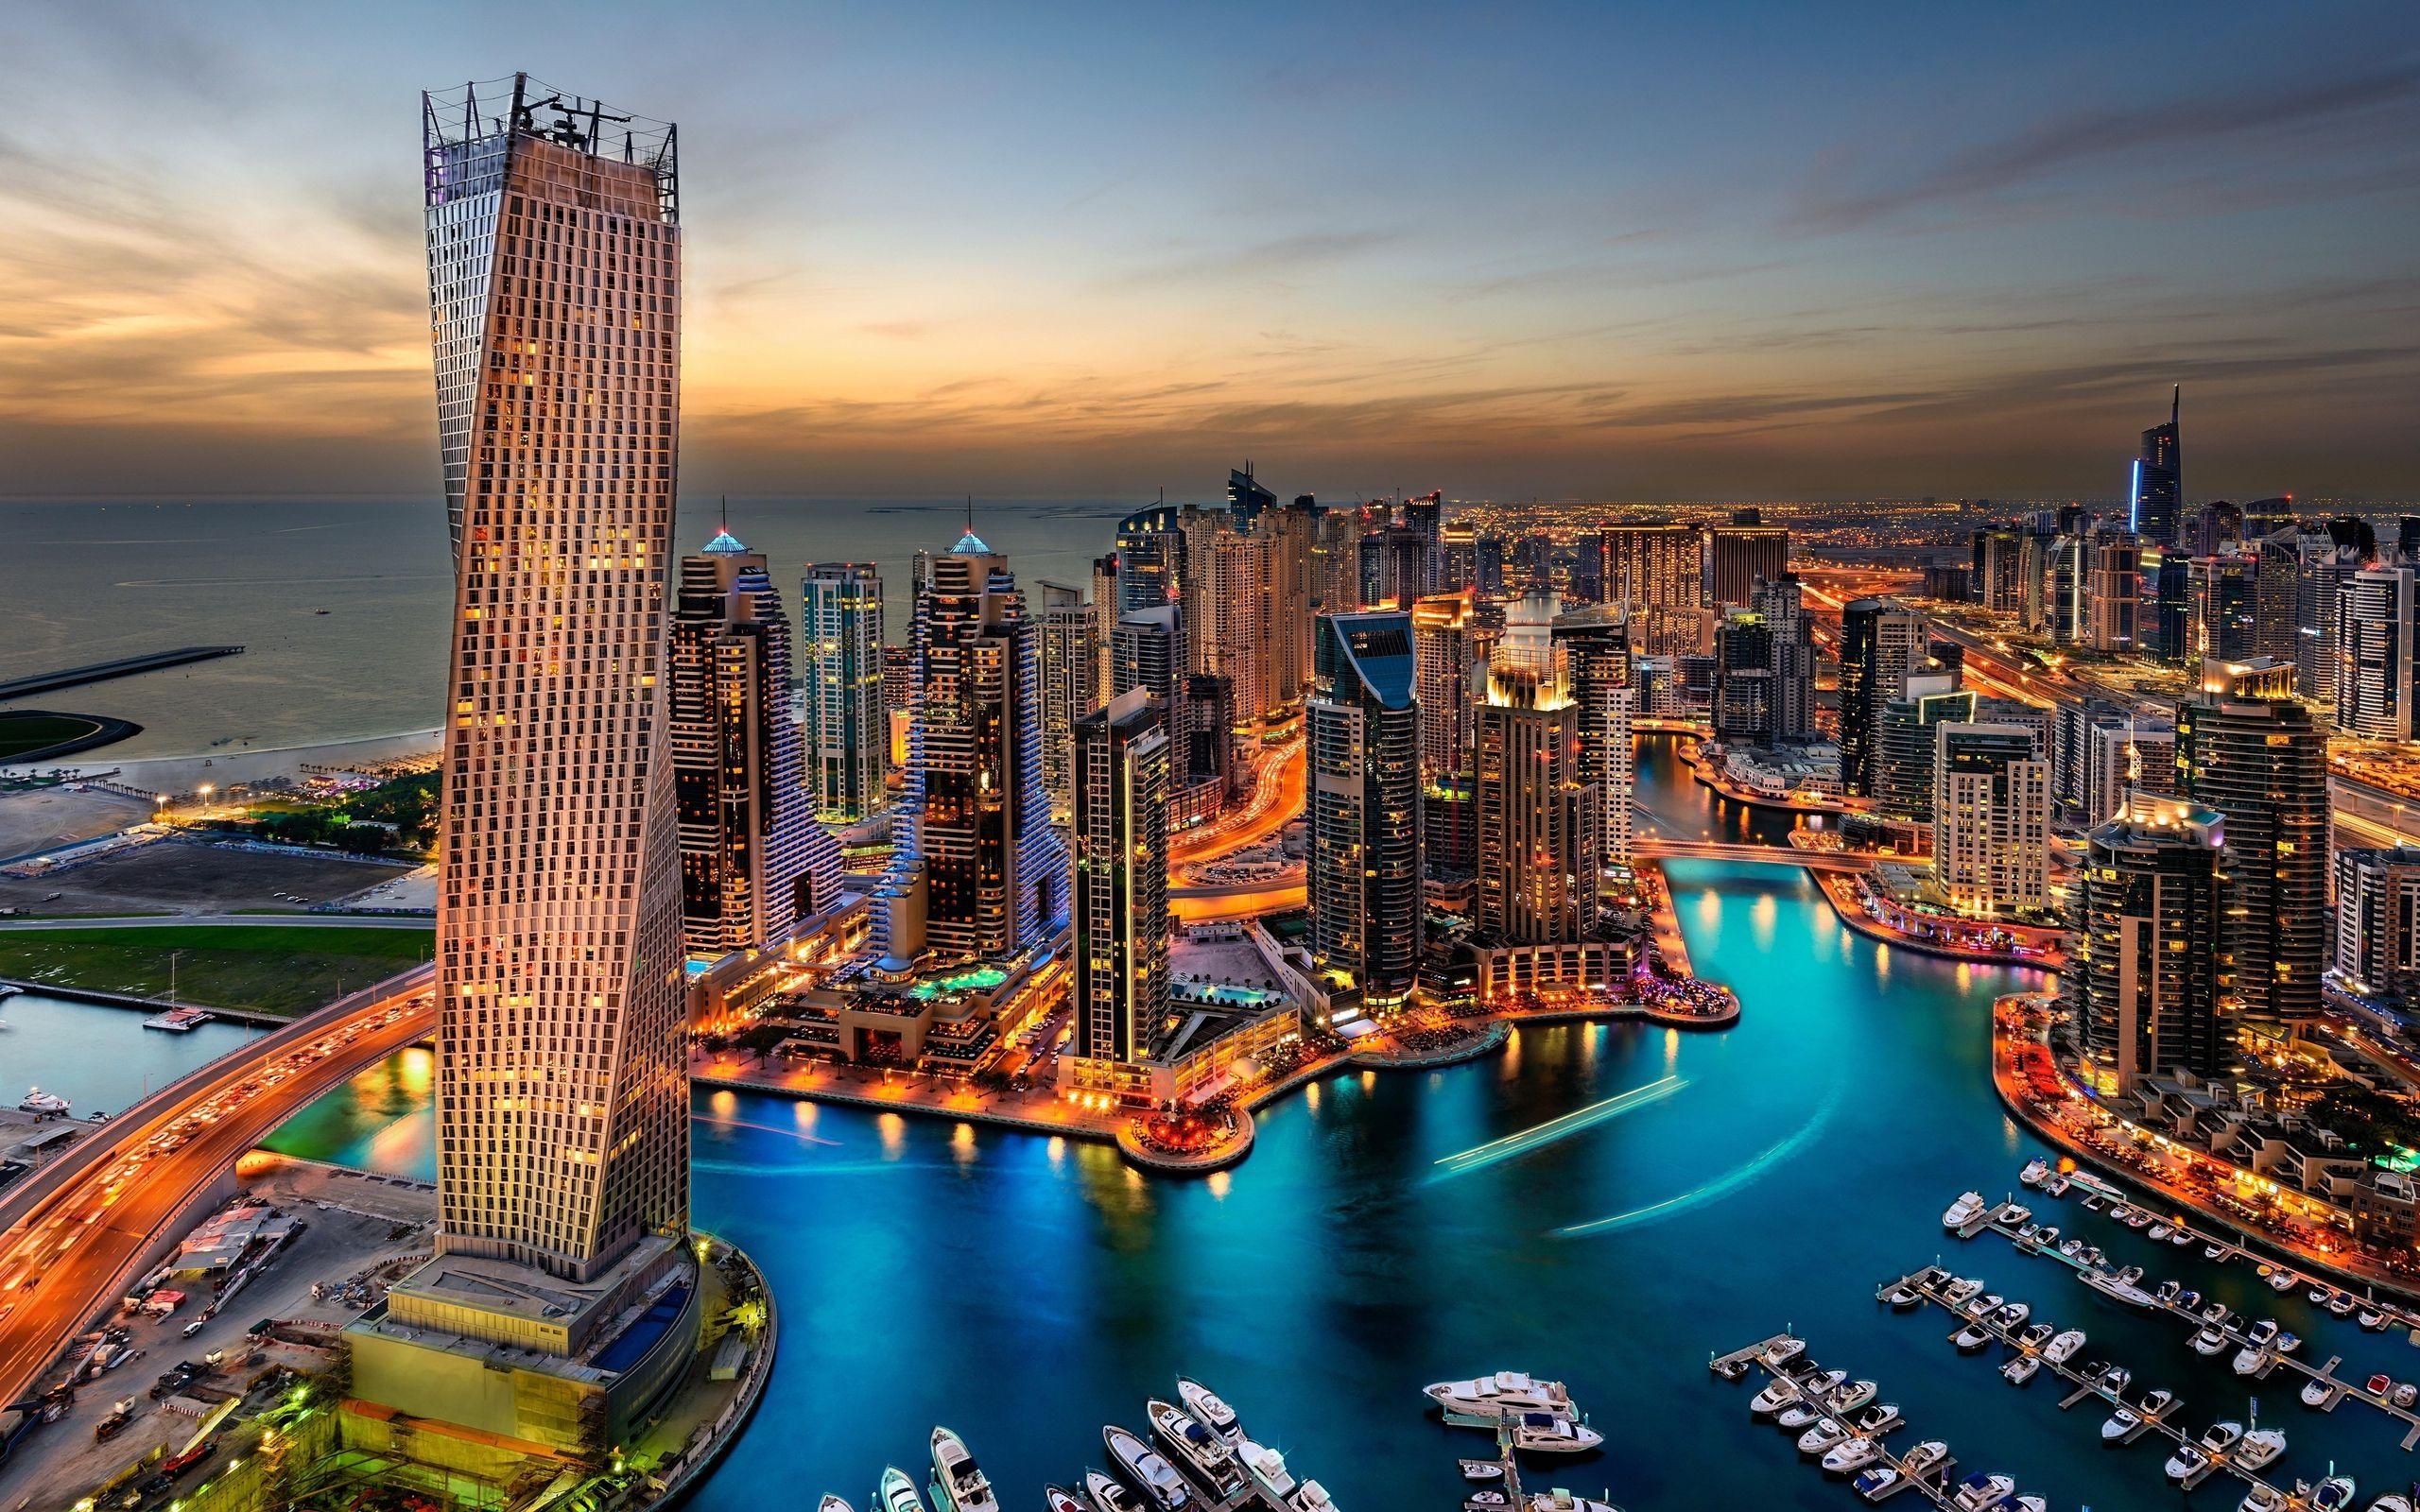 Dubai is one of the most expensive cities in the world to live in - Dubai